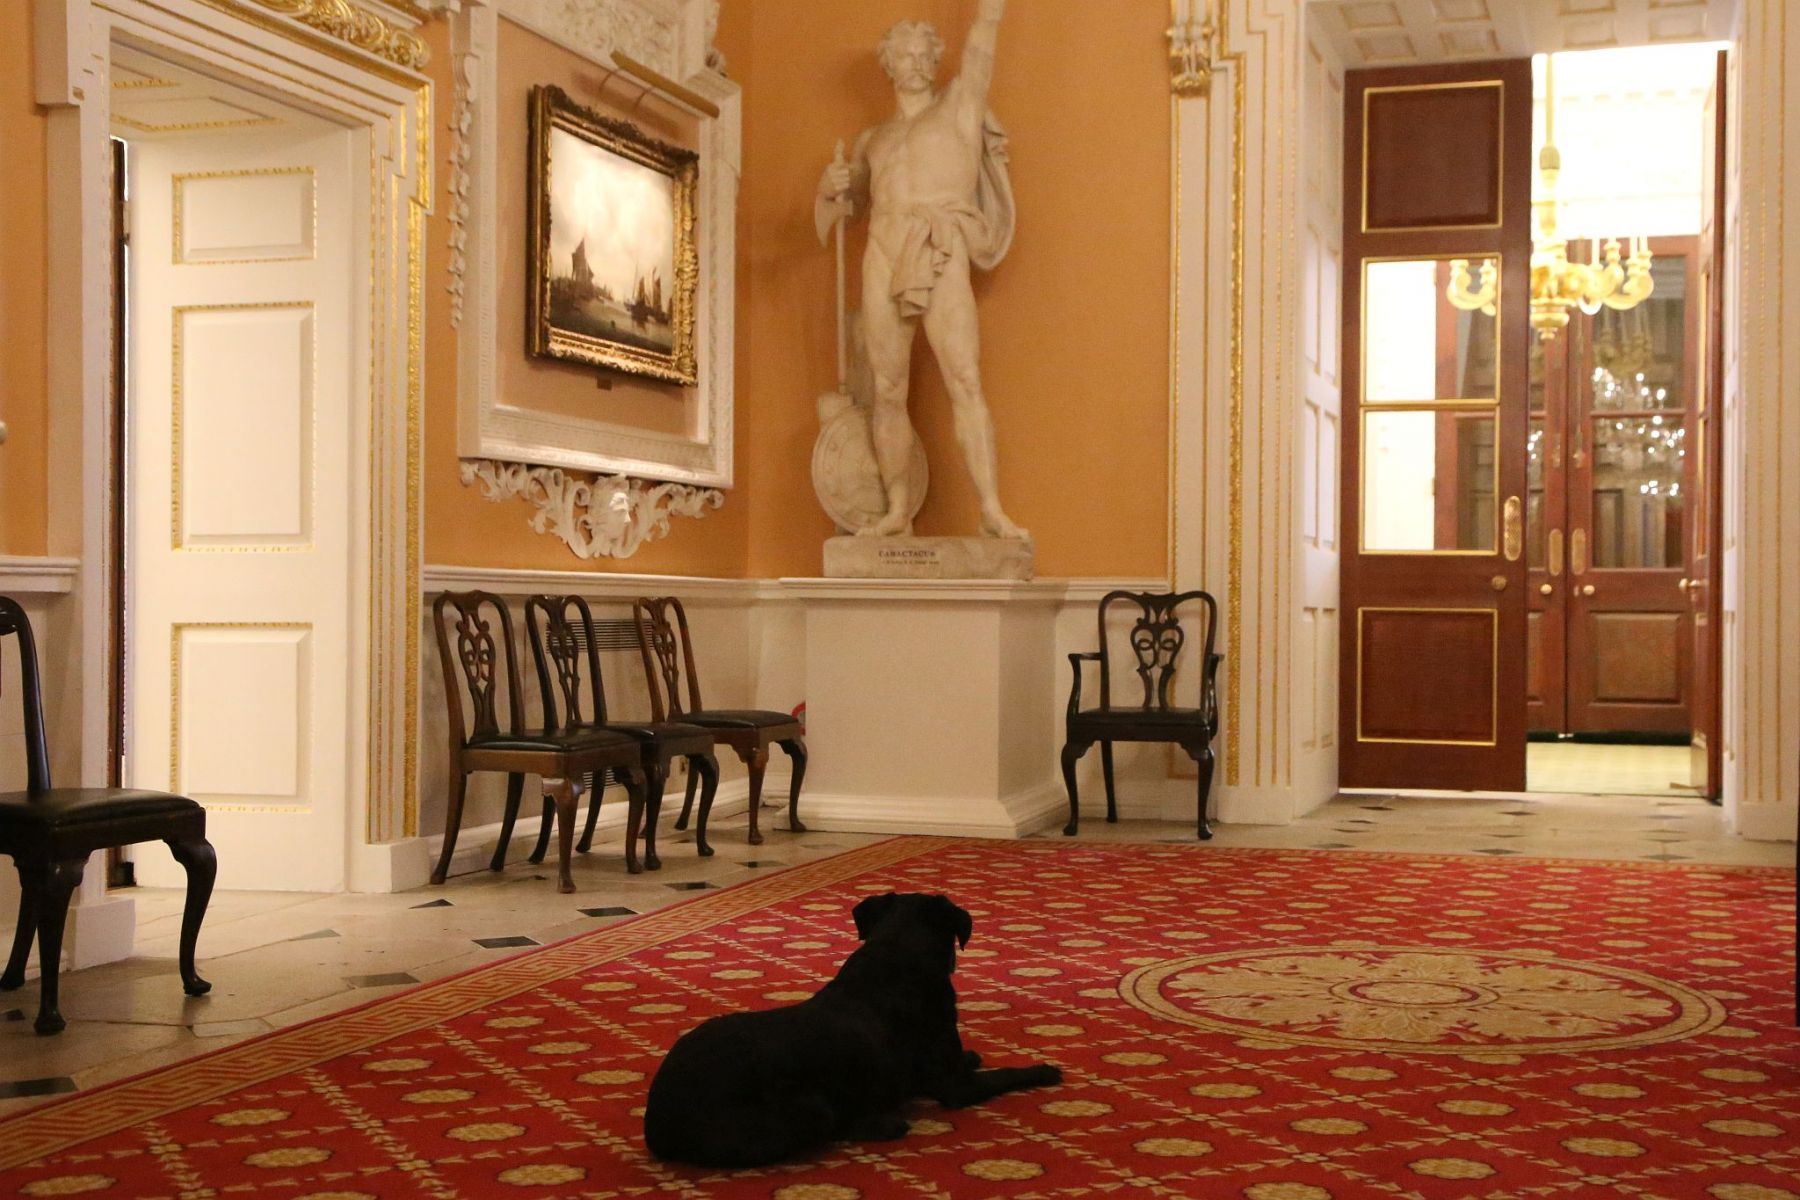 The Lord Mayor's dog lying down at The Mansion House, home to the Lord Mayor of the City of London.